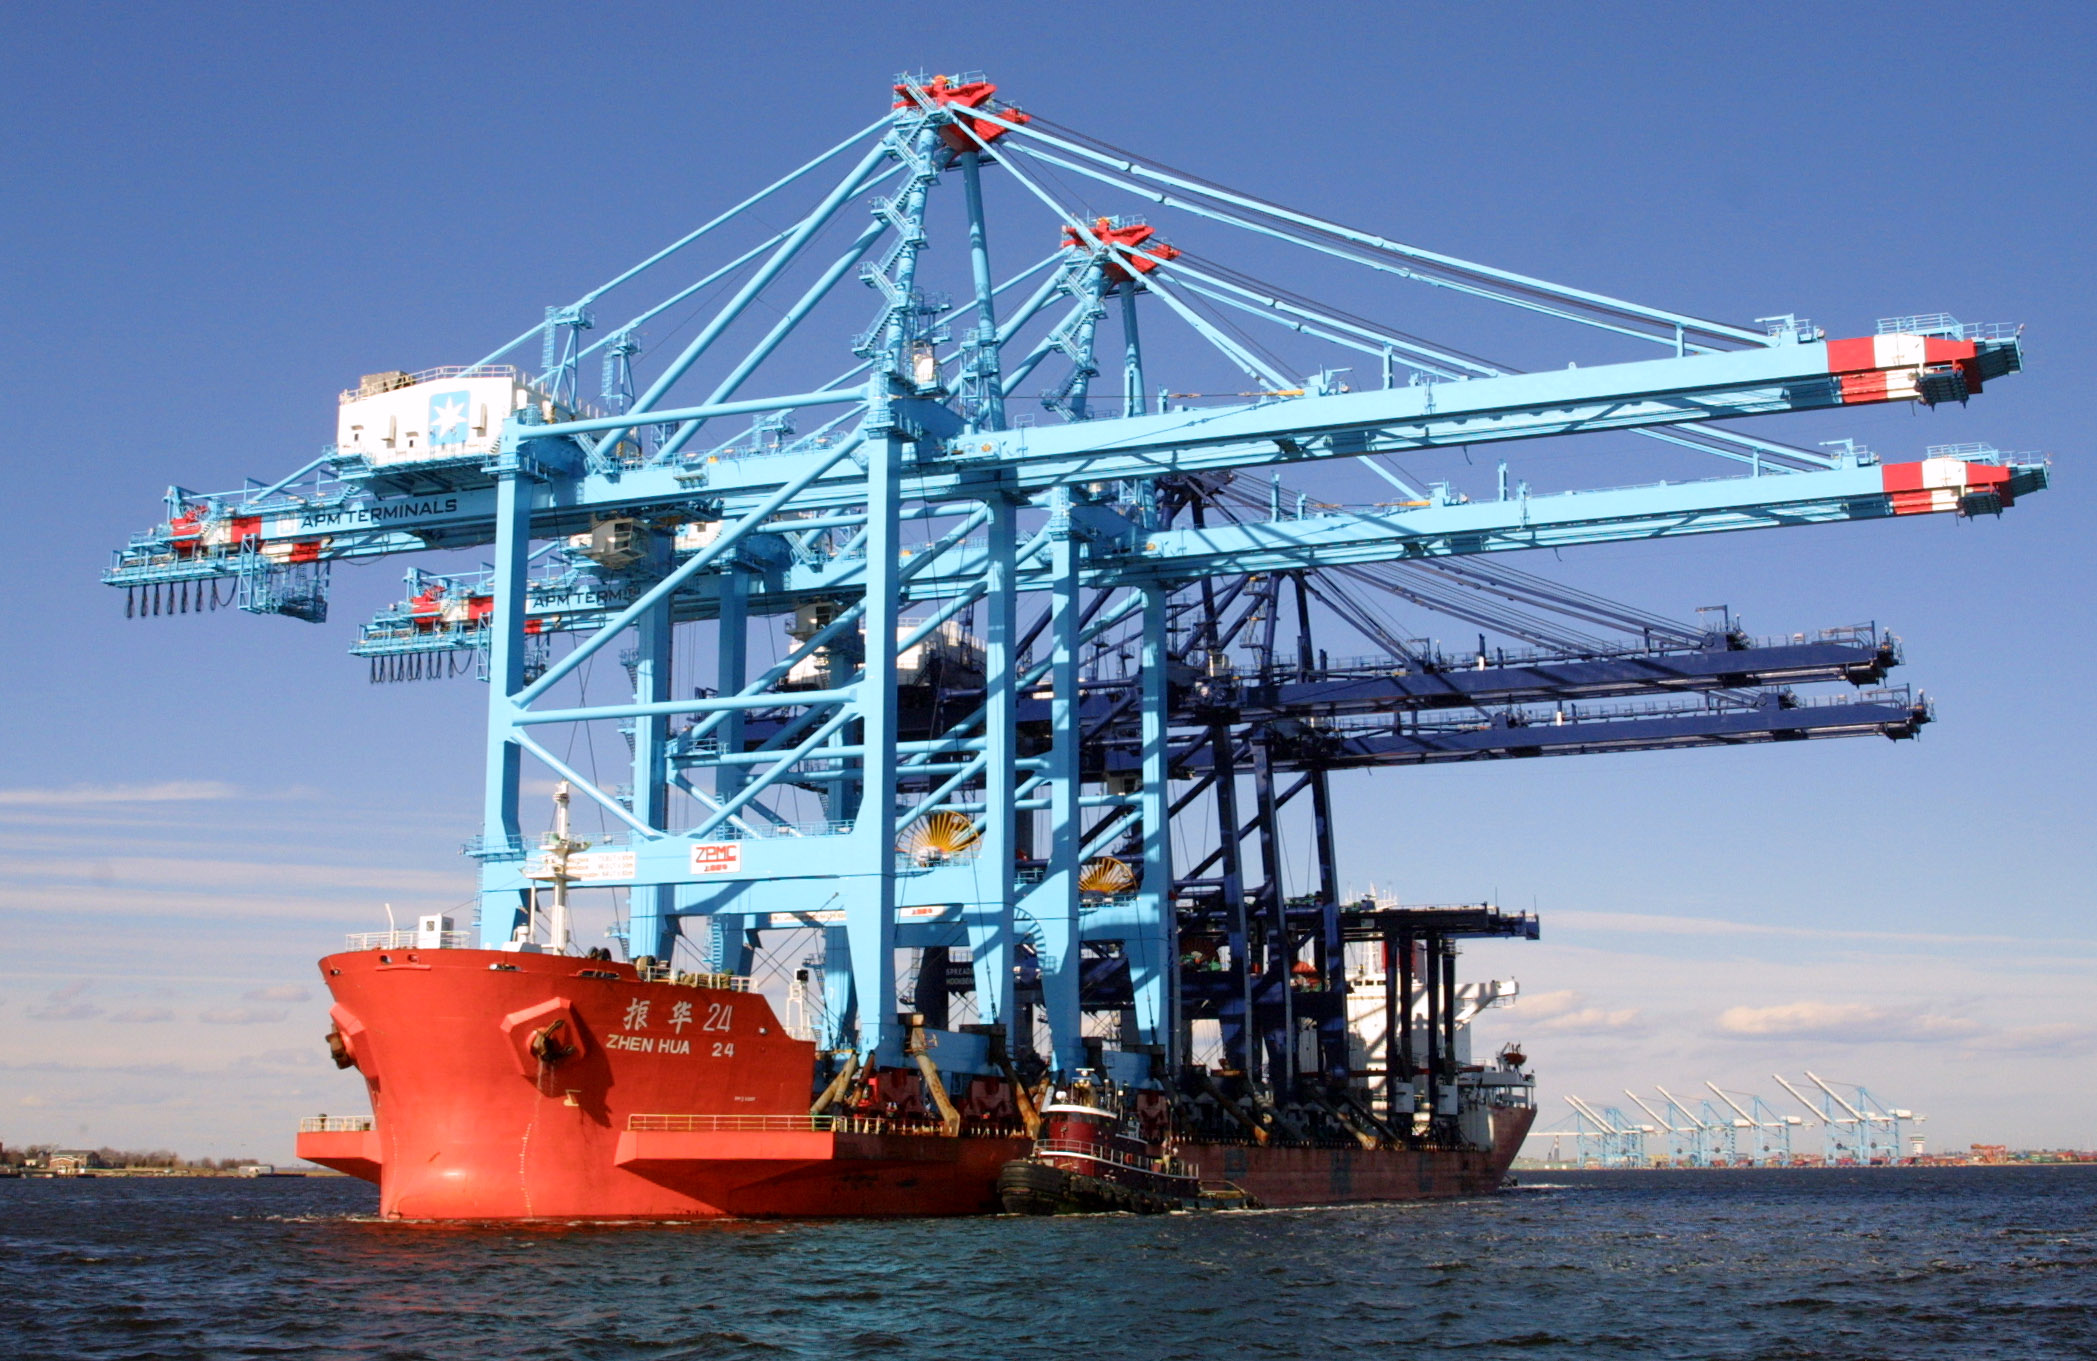 New Cranes Arrive at APM Terminals Without Incident - Port of ...